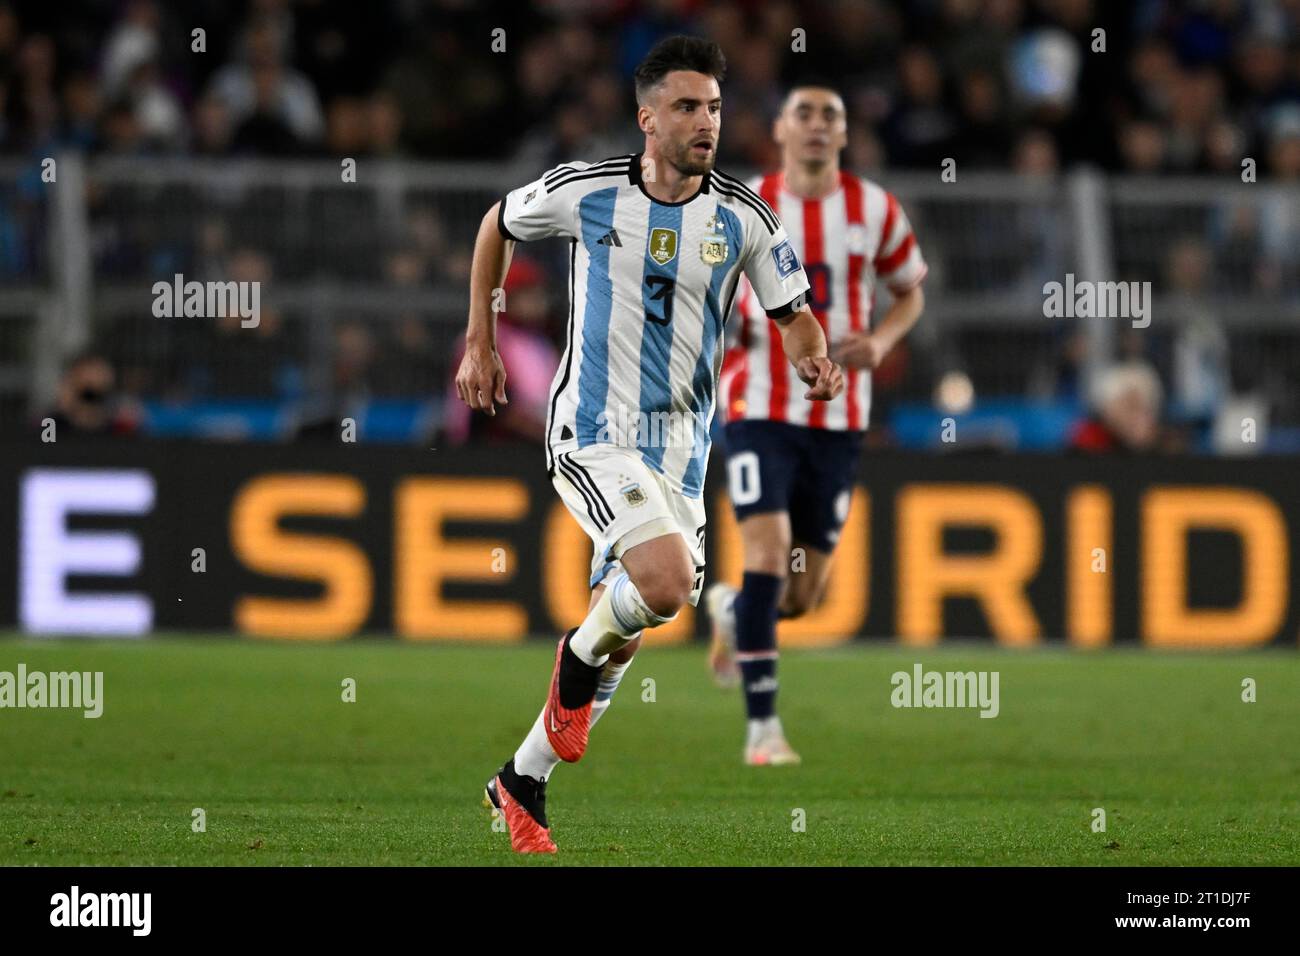 BUENOS AIRES, ARGENTINA - OCTOBER 12: Nicolas Tagliafico during the FIFA World Cup 2026 Qualifier match between Argentina and Paraguay at Estadio Mas Stock Photo